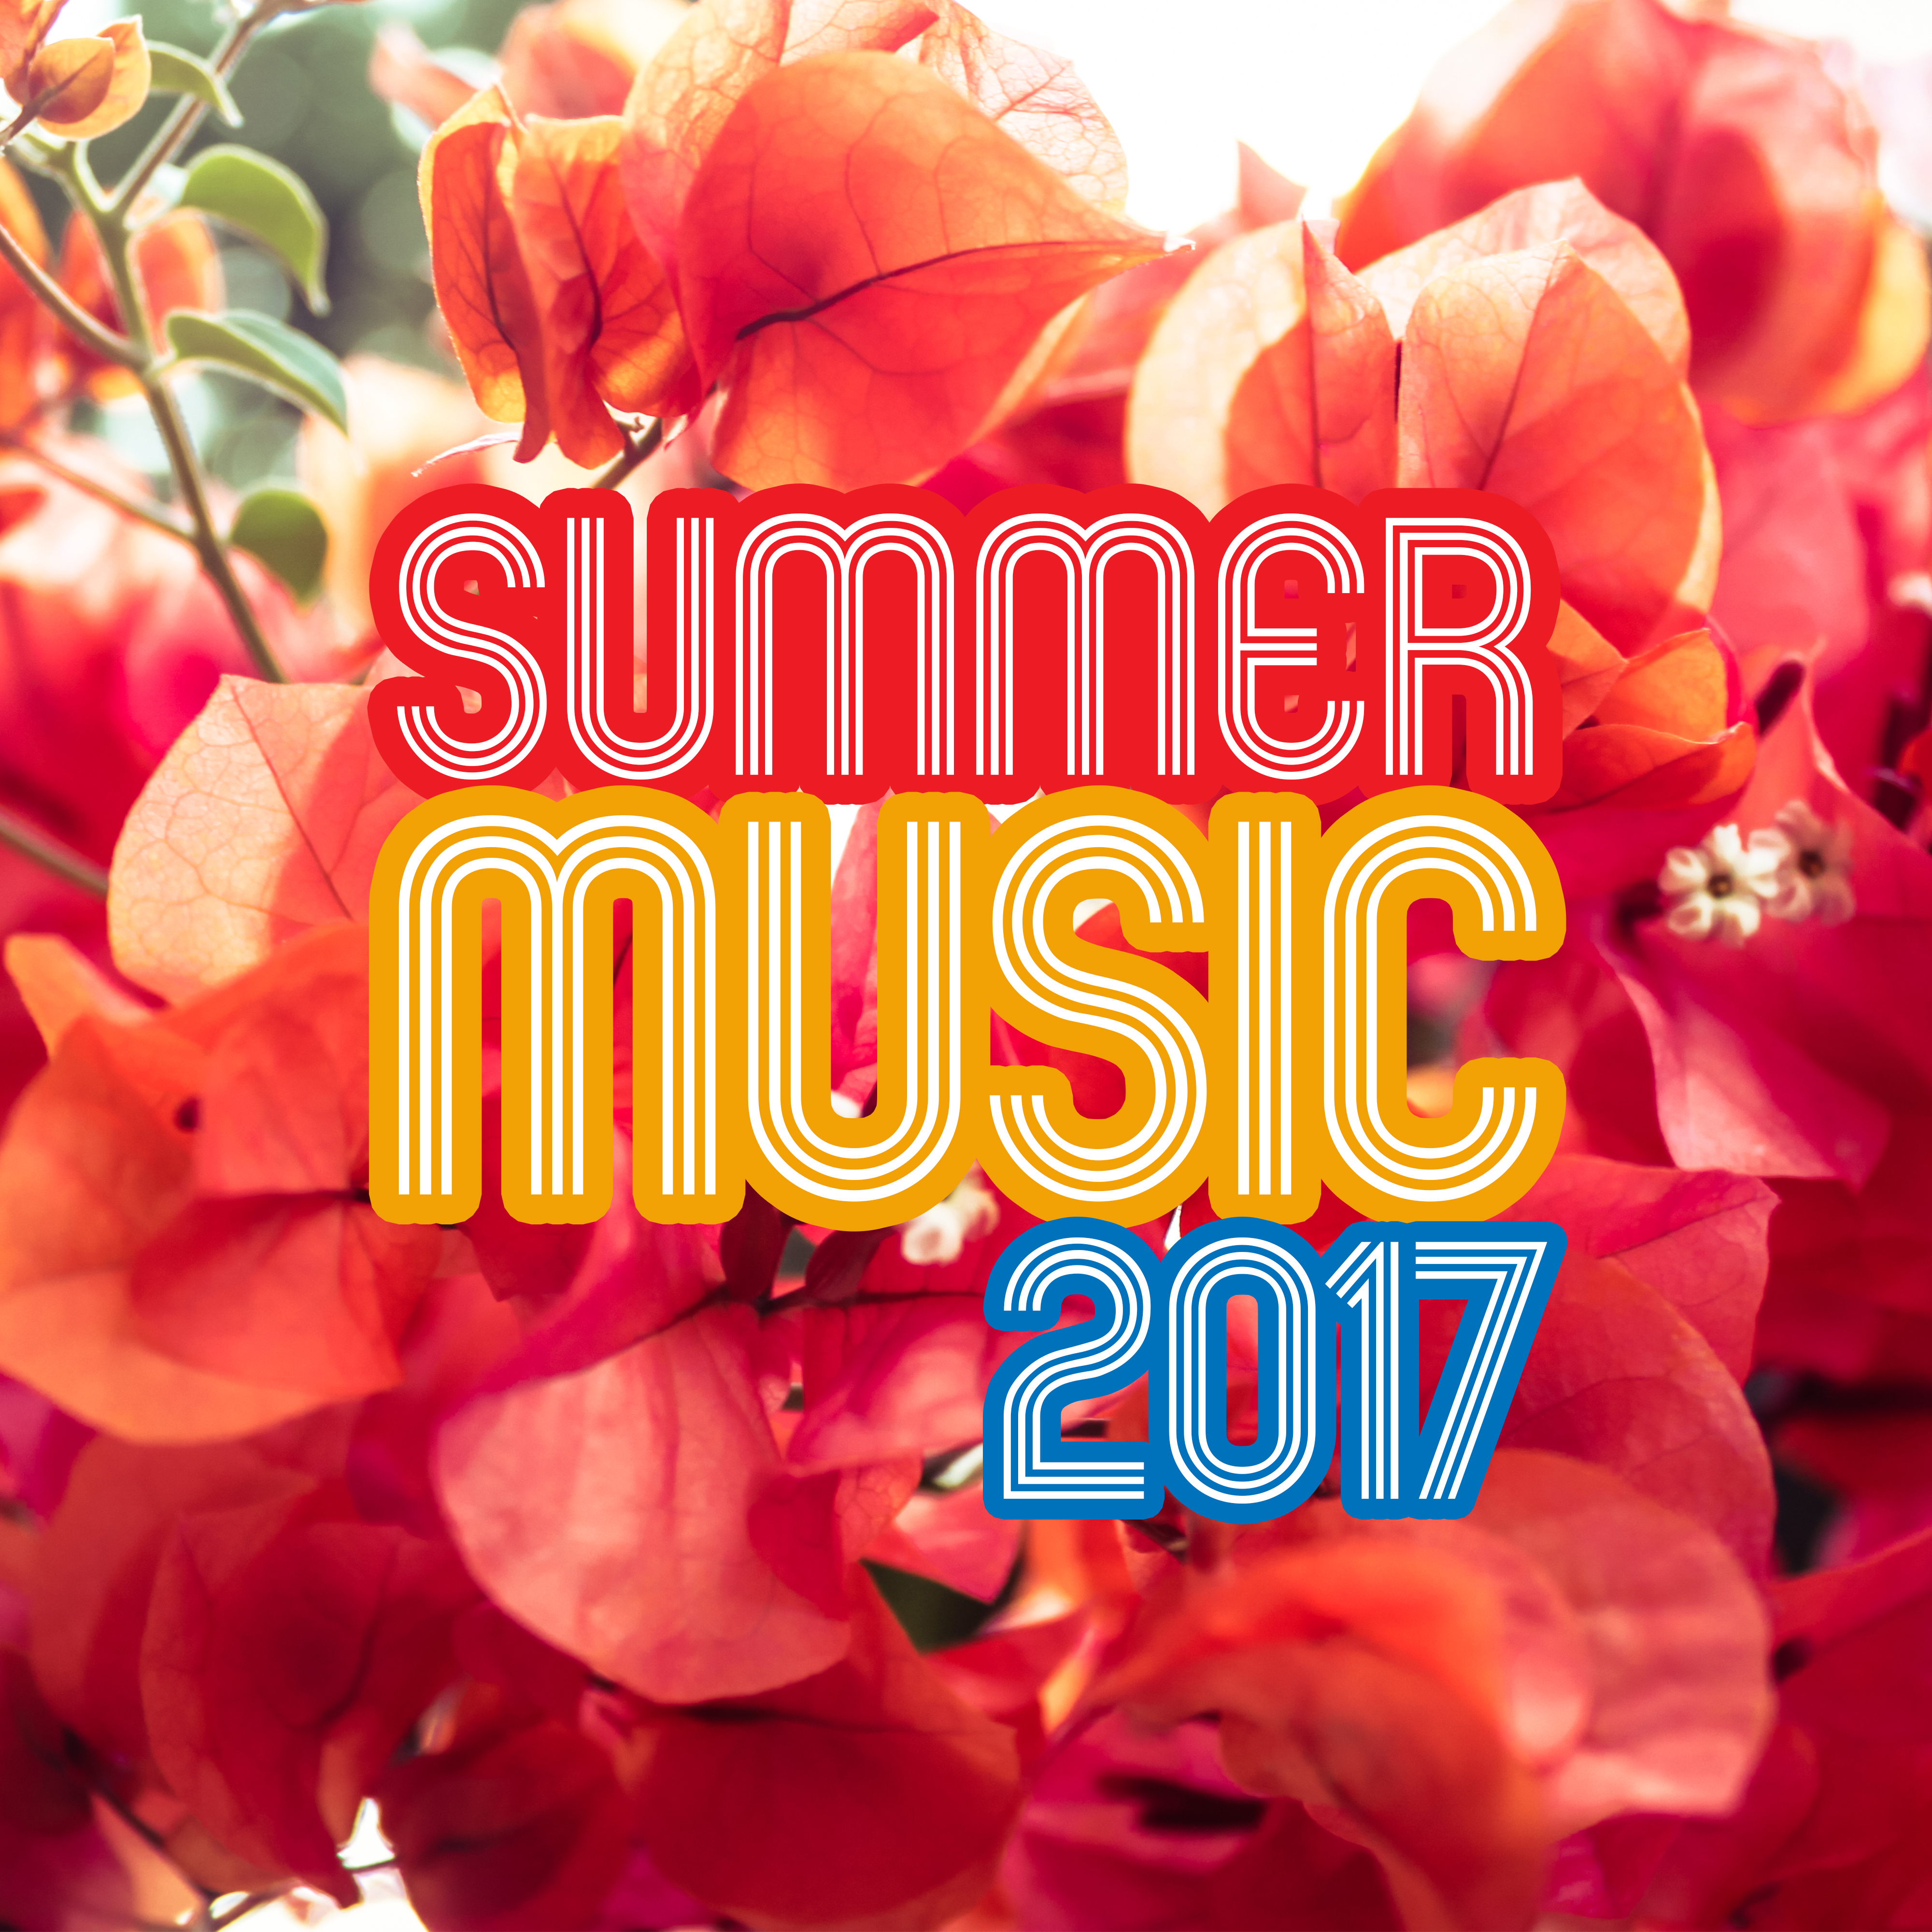 Summer Music 2017  Ibiza Dance Party, Relax, Beach Chill, Ibiza Summertime, Sensual Dance,  Vibes, Ambient Chill Out, Party Night